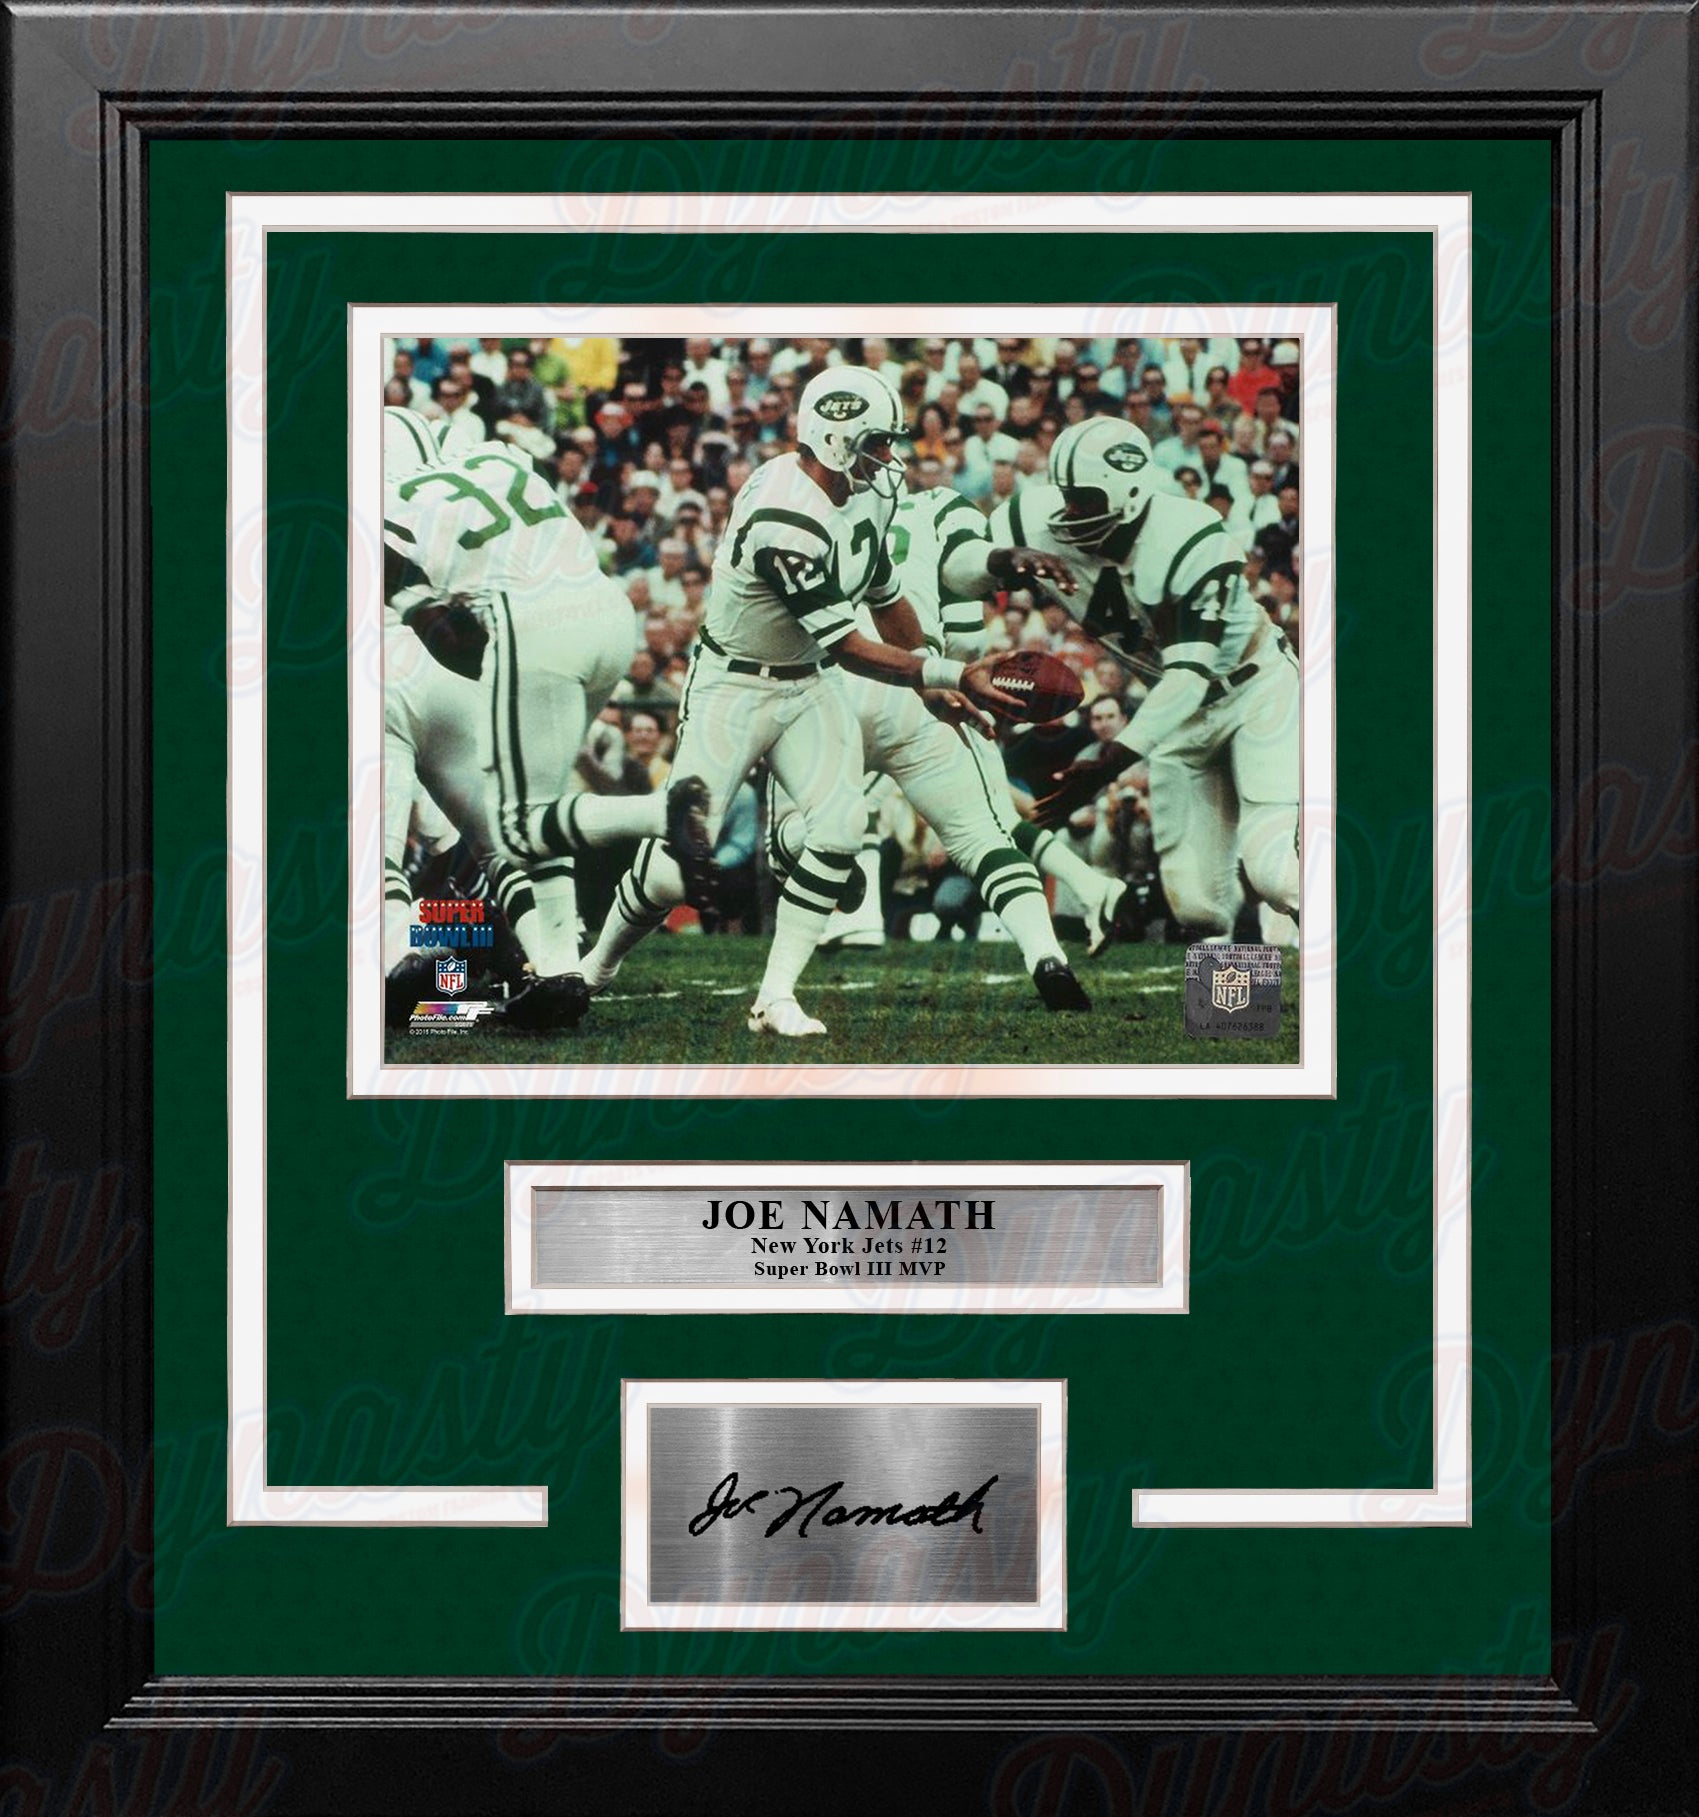 Joe Namath Super Bowl III Color New York Jets 8x10 Framed Football Photo  with Engraved Autograph